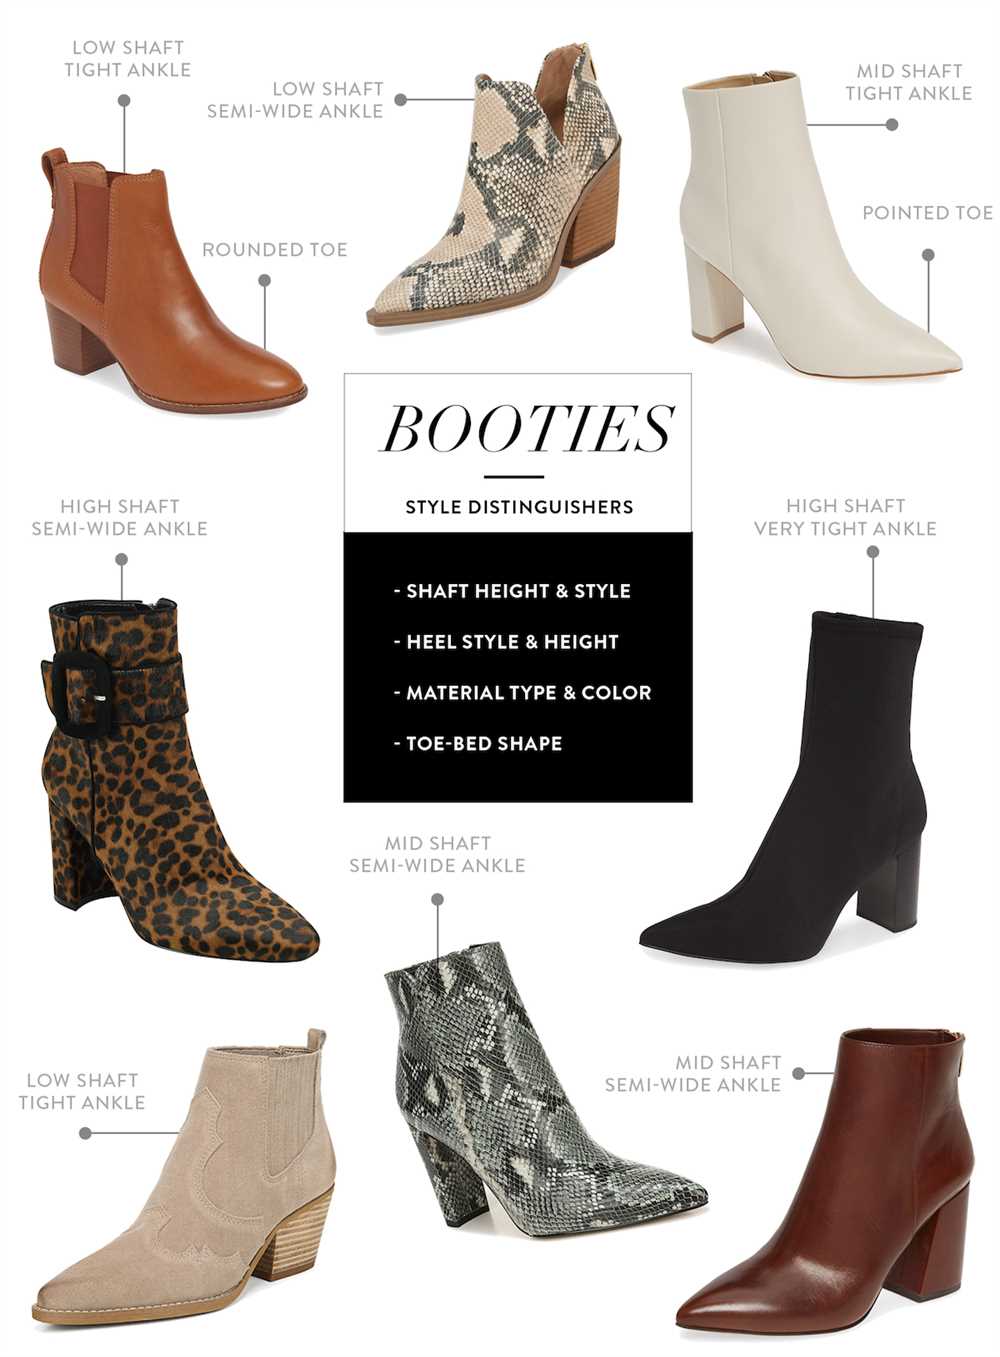 How to accessorize high ankle boots